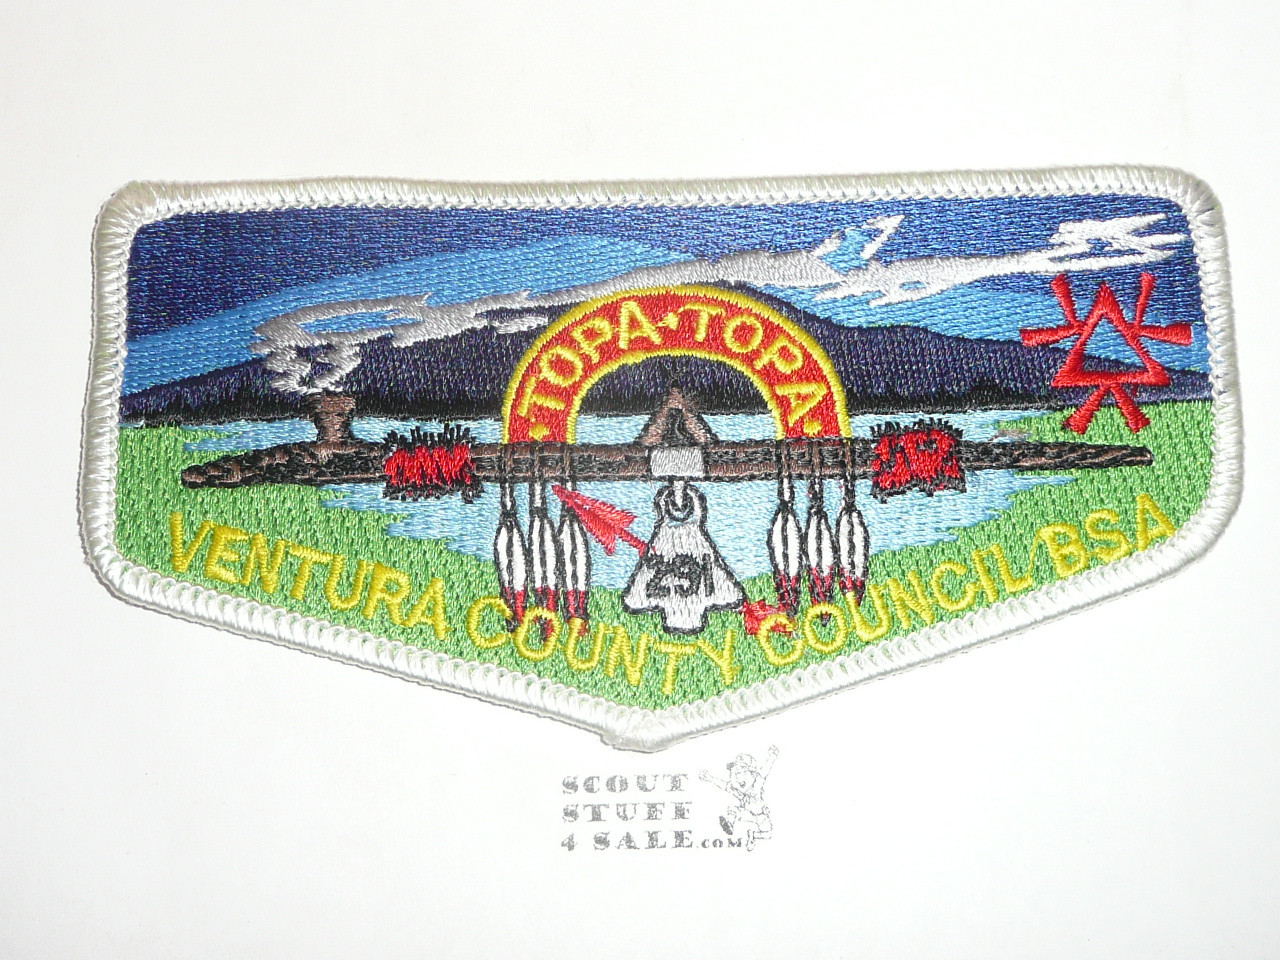 Order of the Arrow Lodge #291 Topa Topa s31 Flap Patch